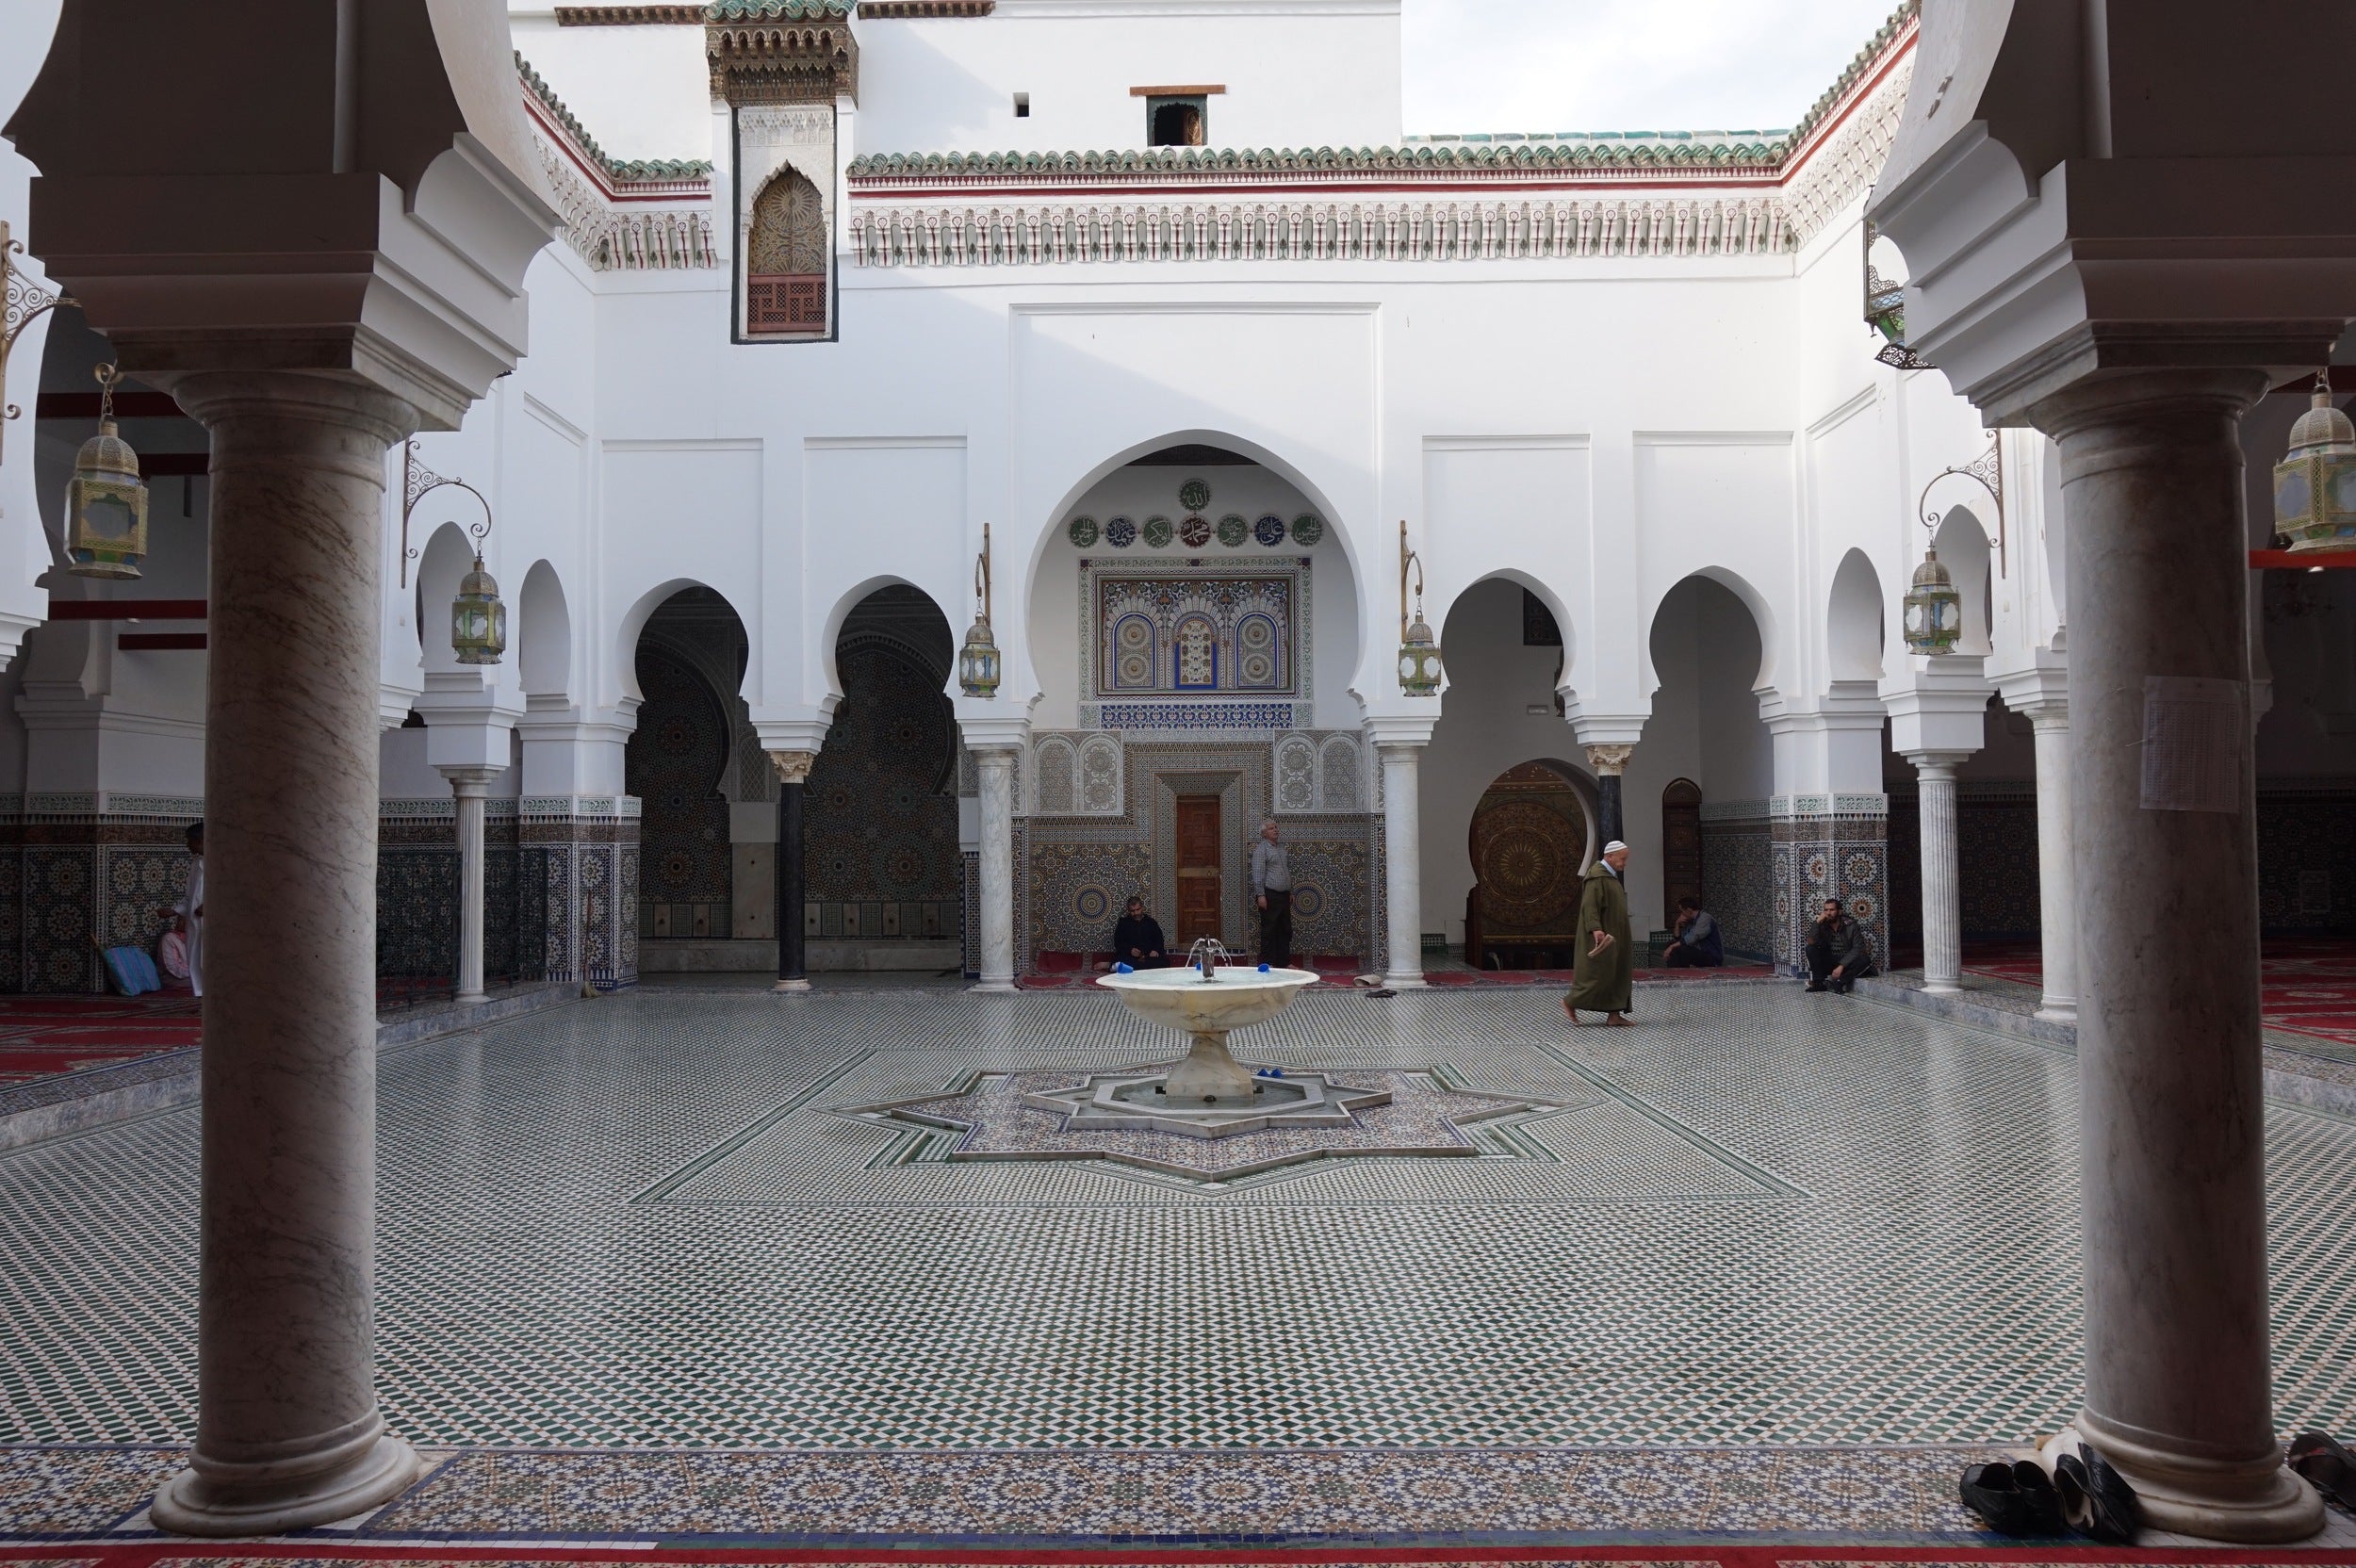 My trip to Morocco: First stop, Fez!